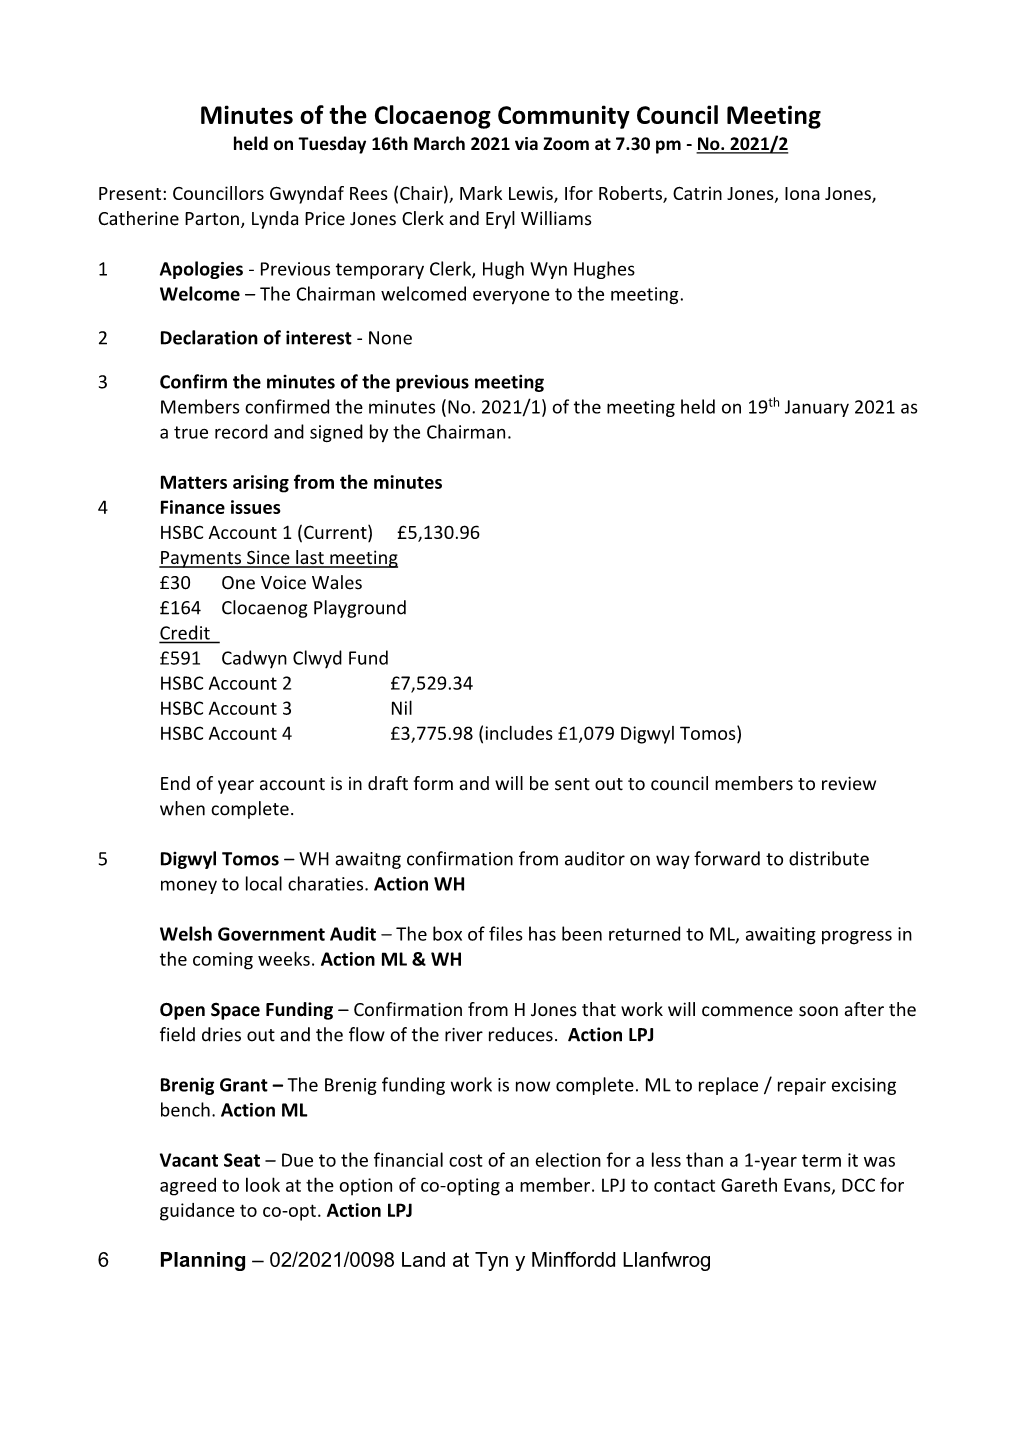 Minutes of the Clocaenog Community Council Meeting Held on Tuesday 16Th March 2021 Via Zoom at 7.30 Pm - No